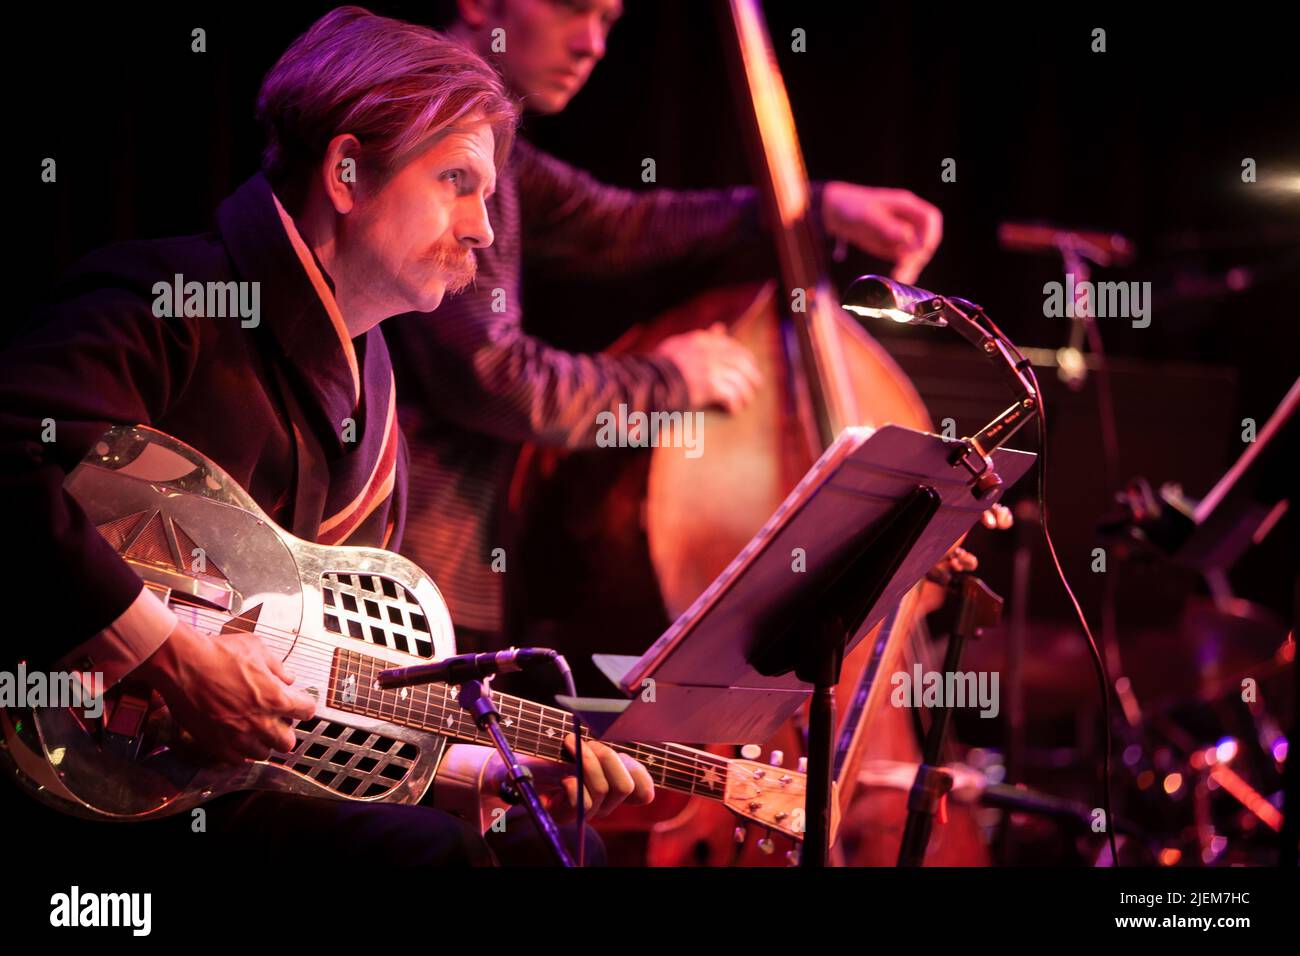 Big Band: guitar and double bass. A jazz guitarist watching the conductor. From a series of images of musicians in a swing Jazz band. Stock Photo